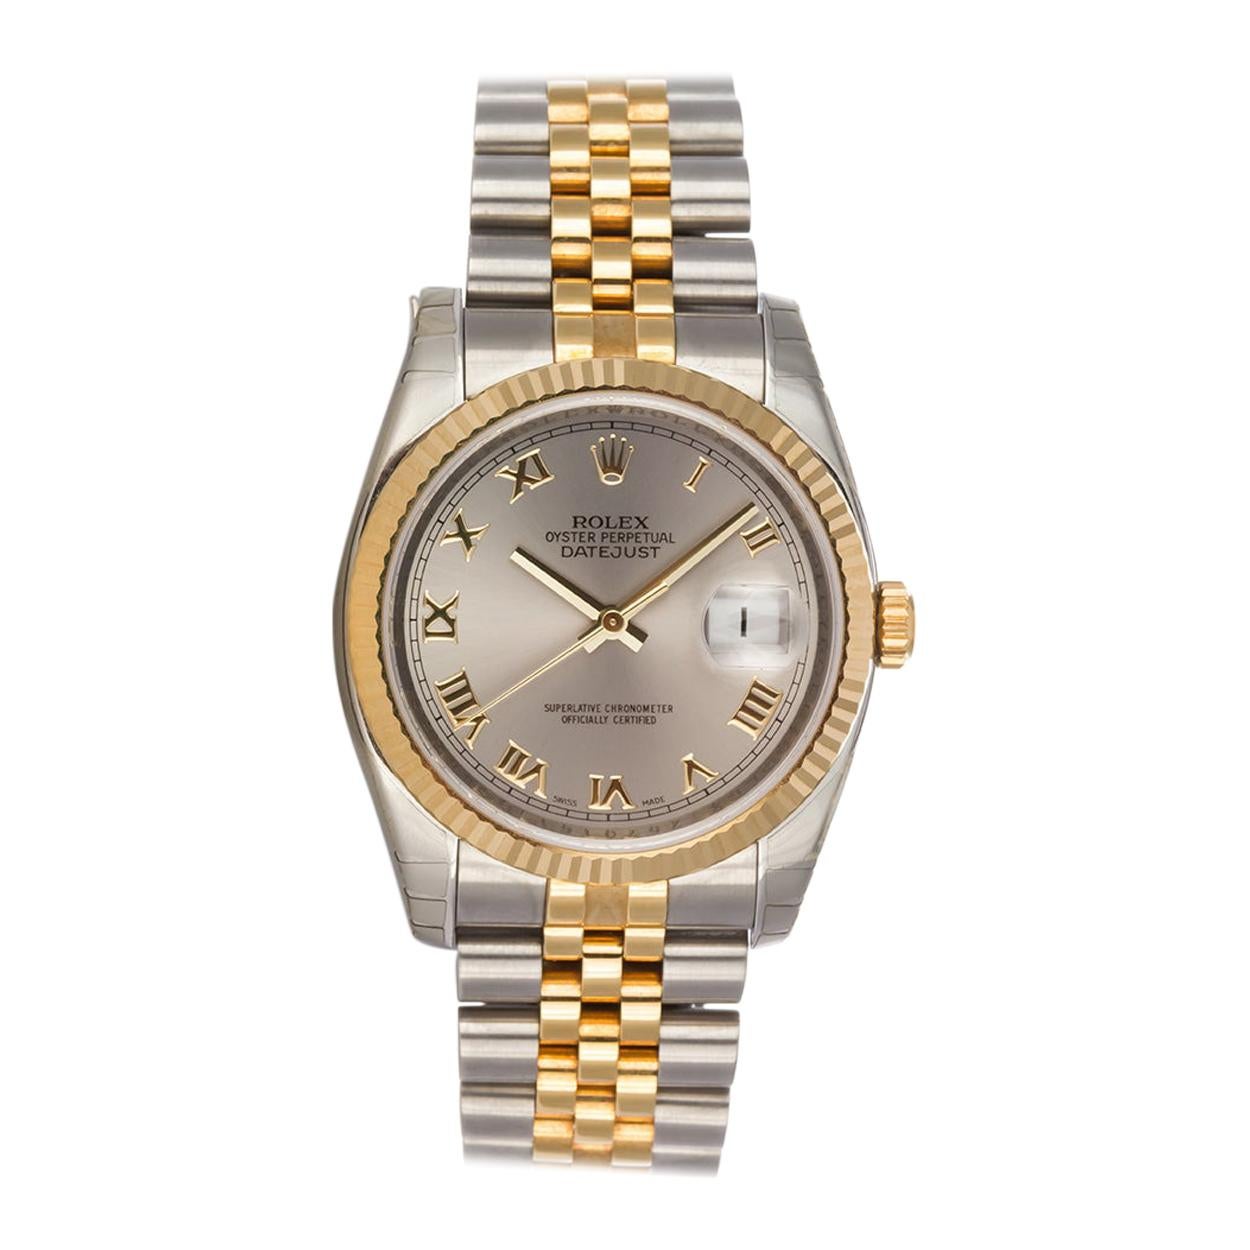 Rolex Two-Tone 18 Karat Yellow Gold and Stainless Steel Datejust 116233 with Box